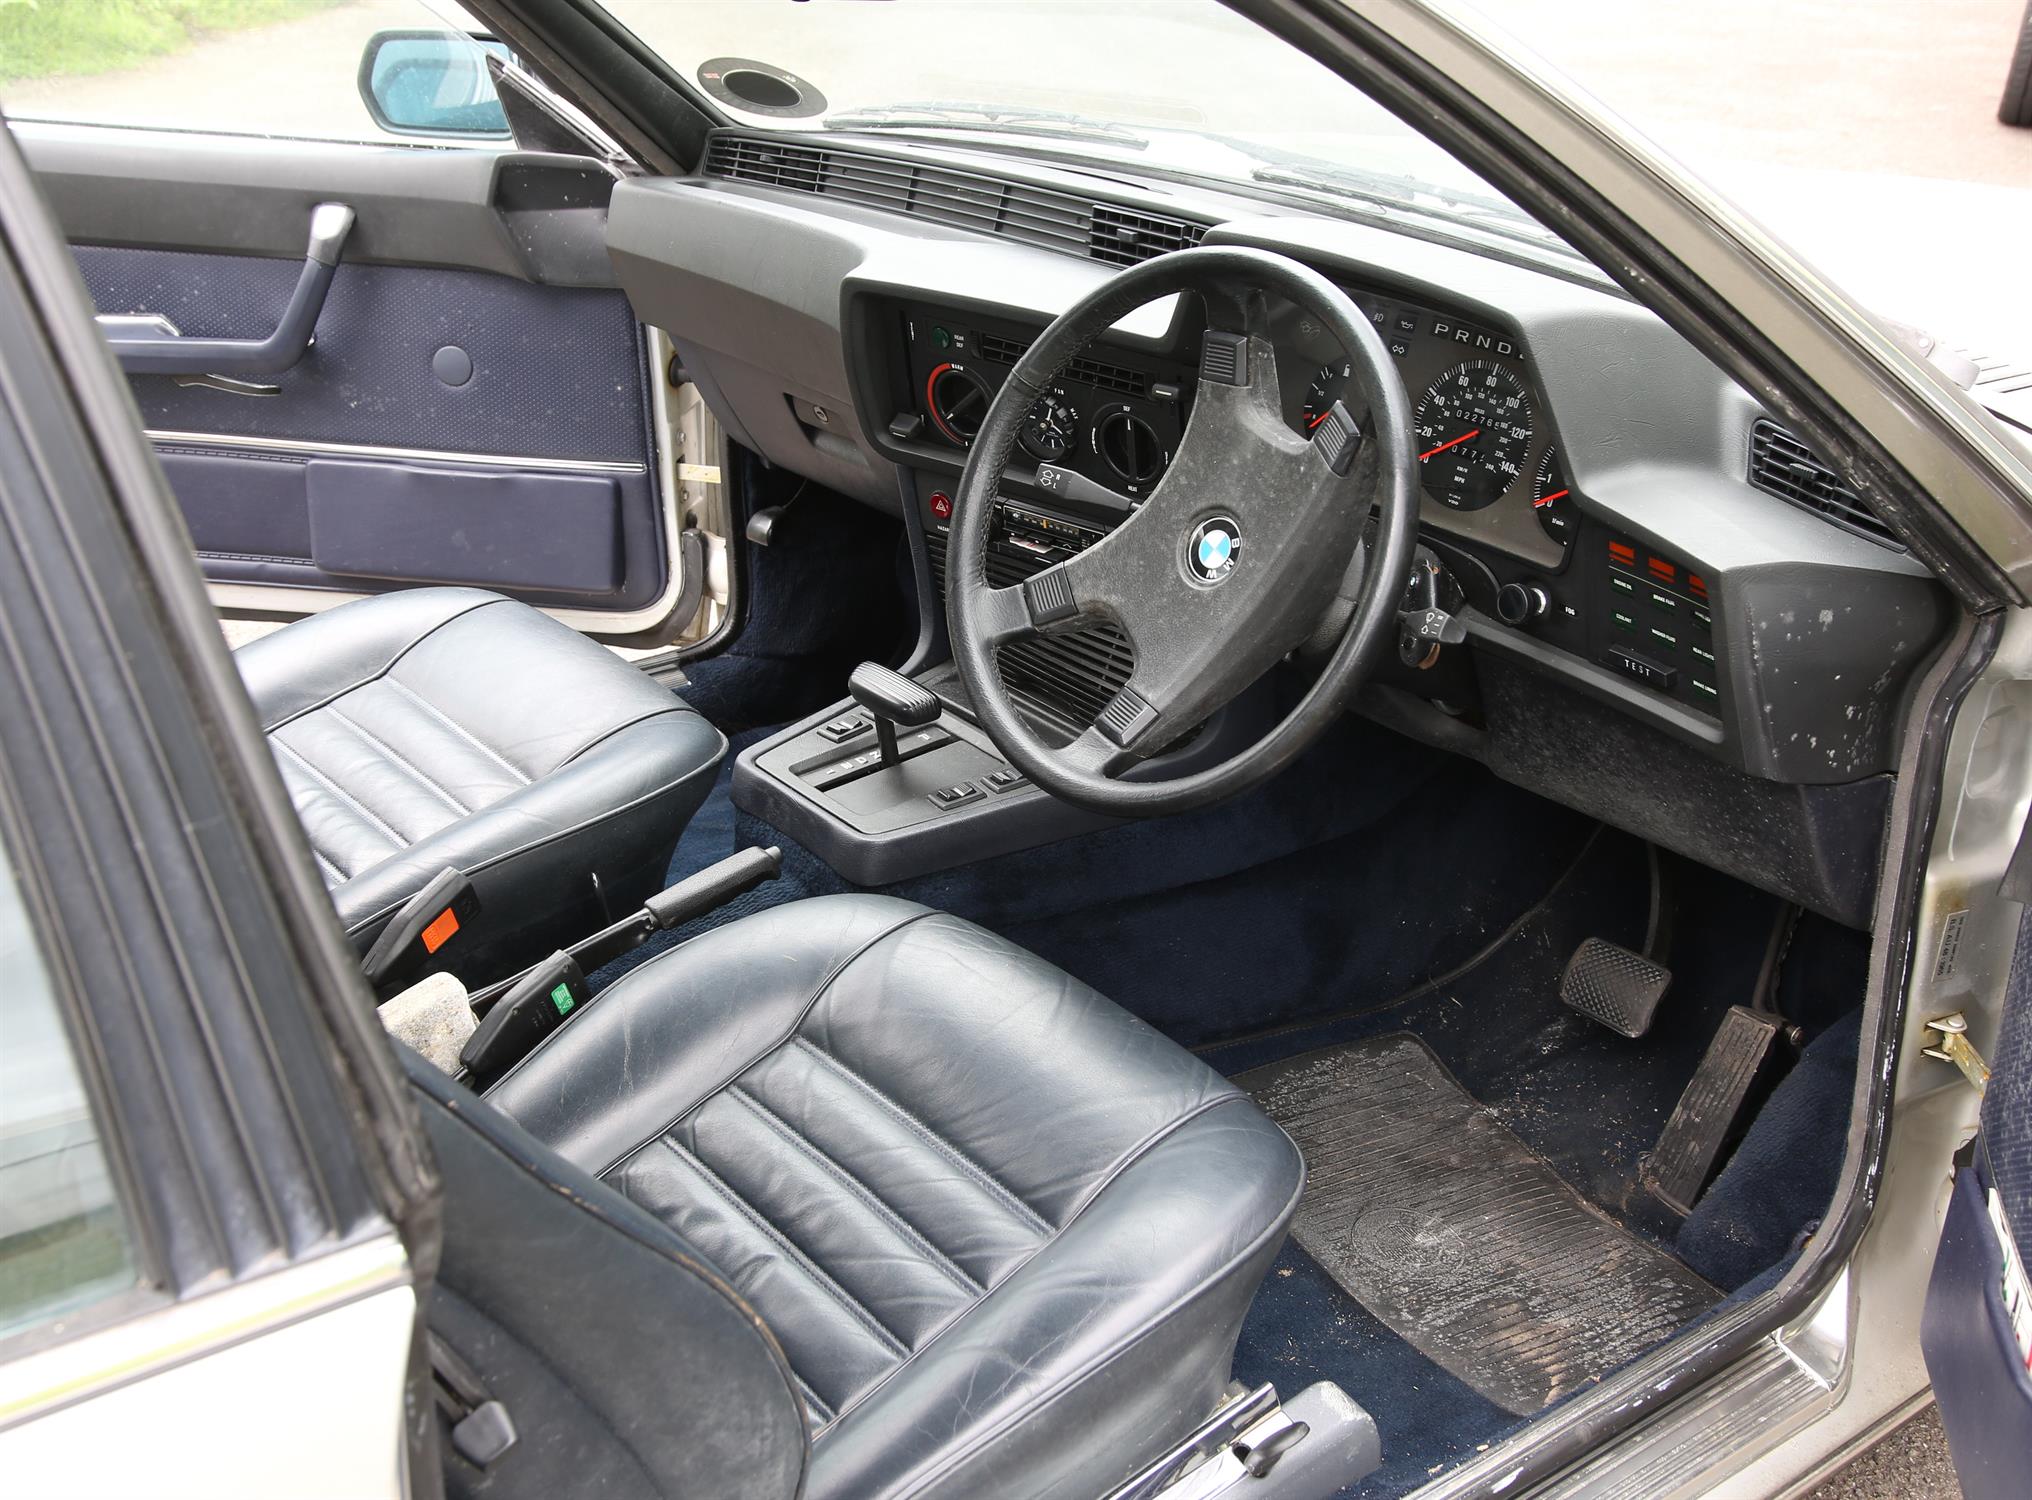 1979 BMW 633csi for Restoration/Recommissioning. Registration number AUV 15T Metallic Silver - Image 8 of 9